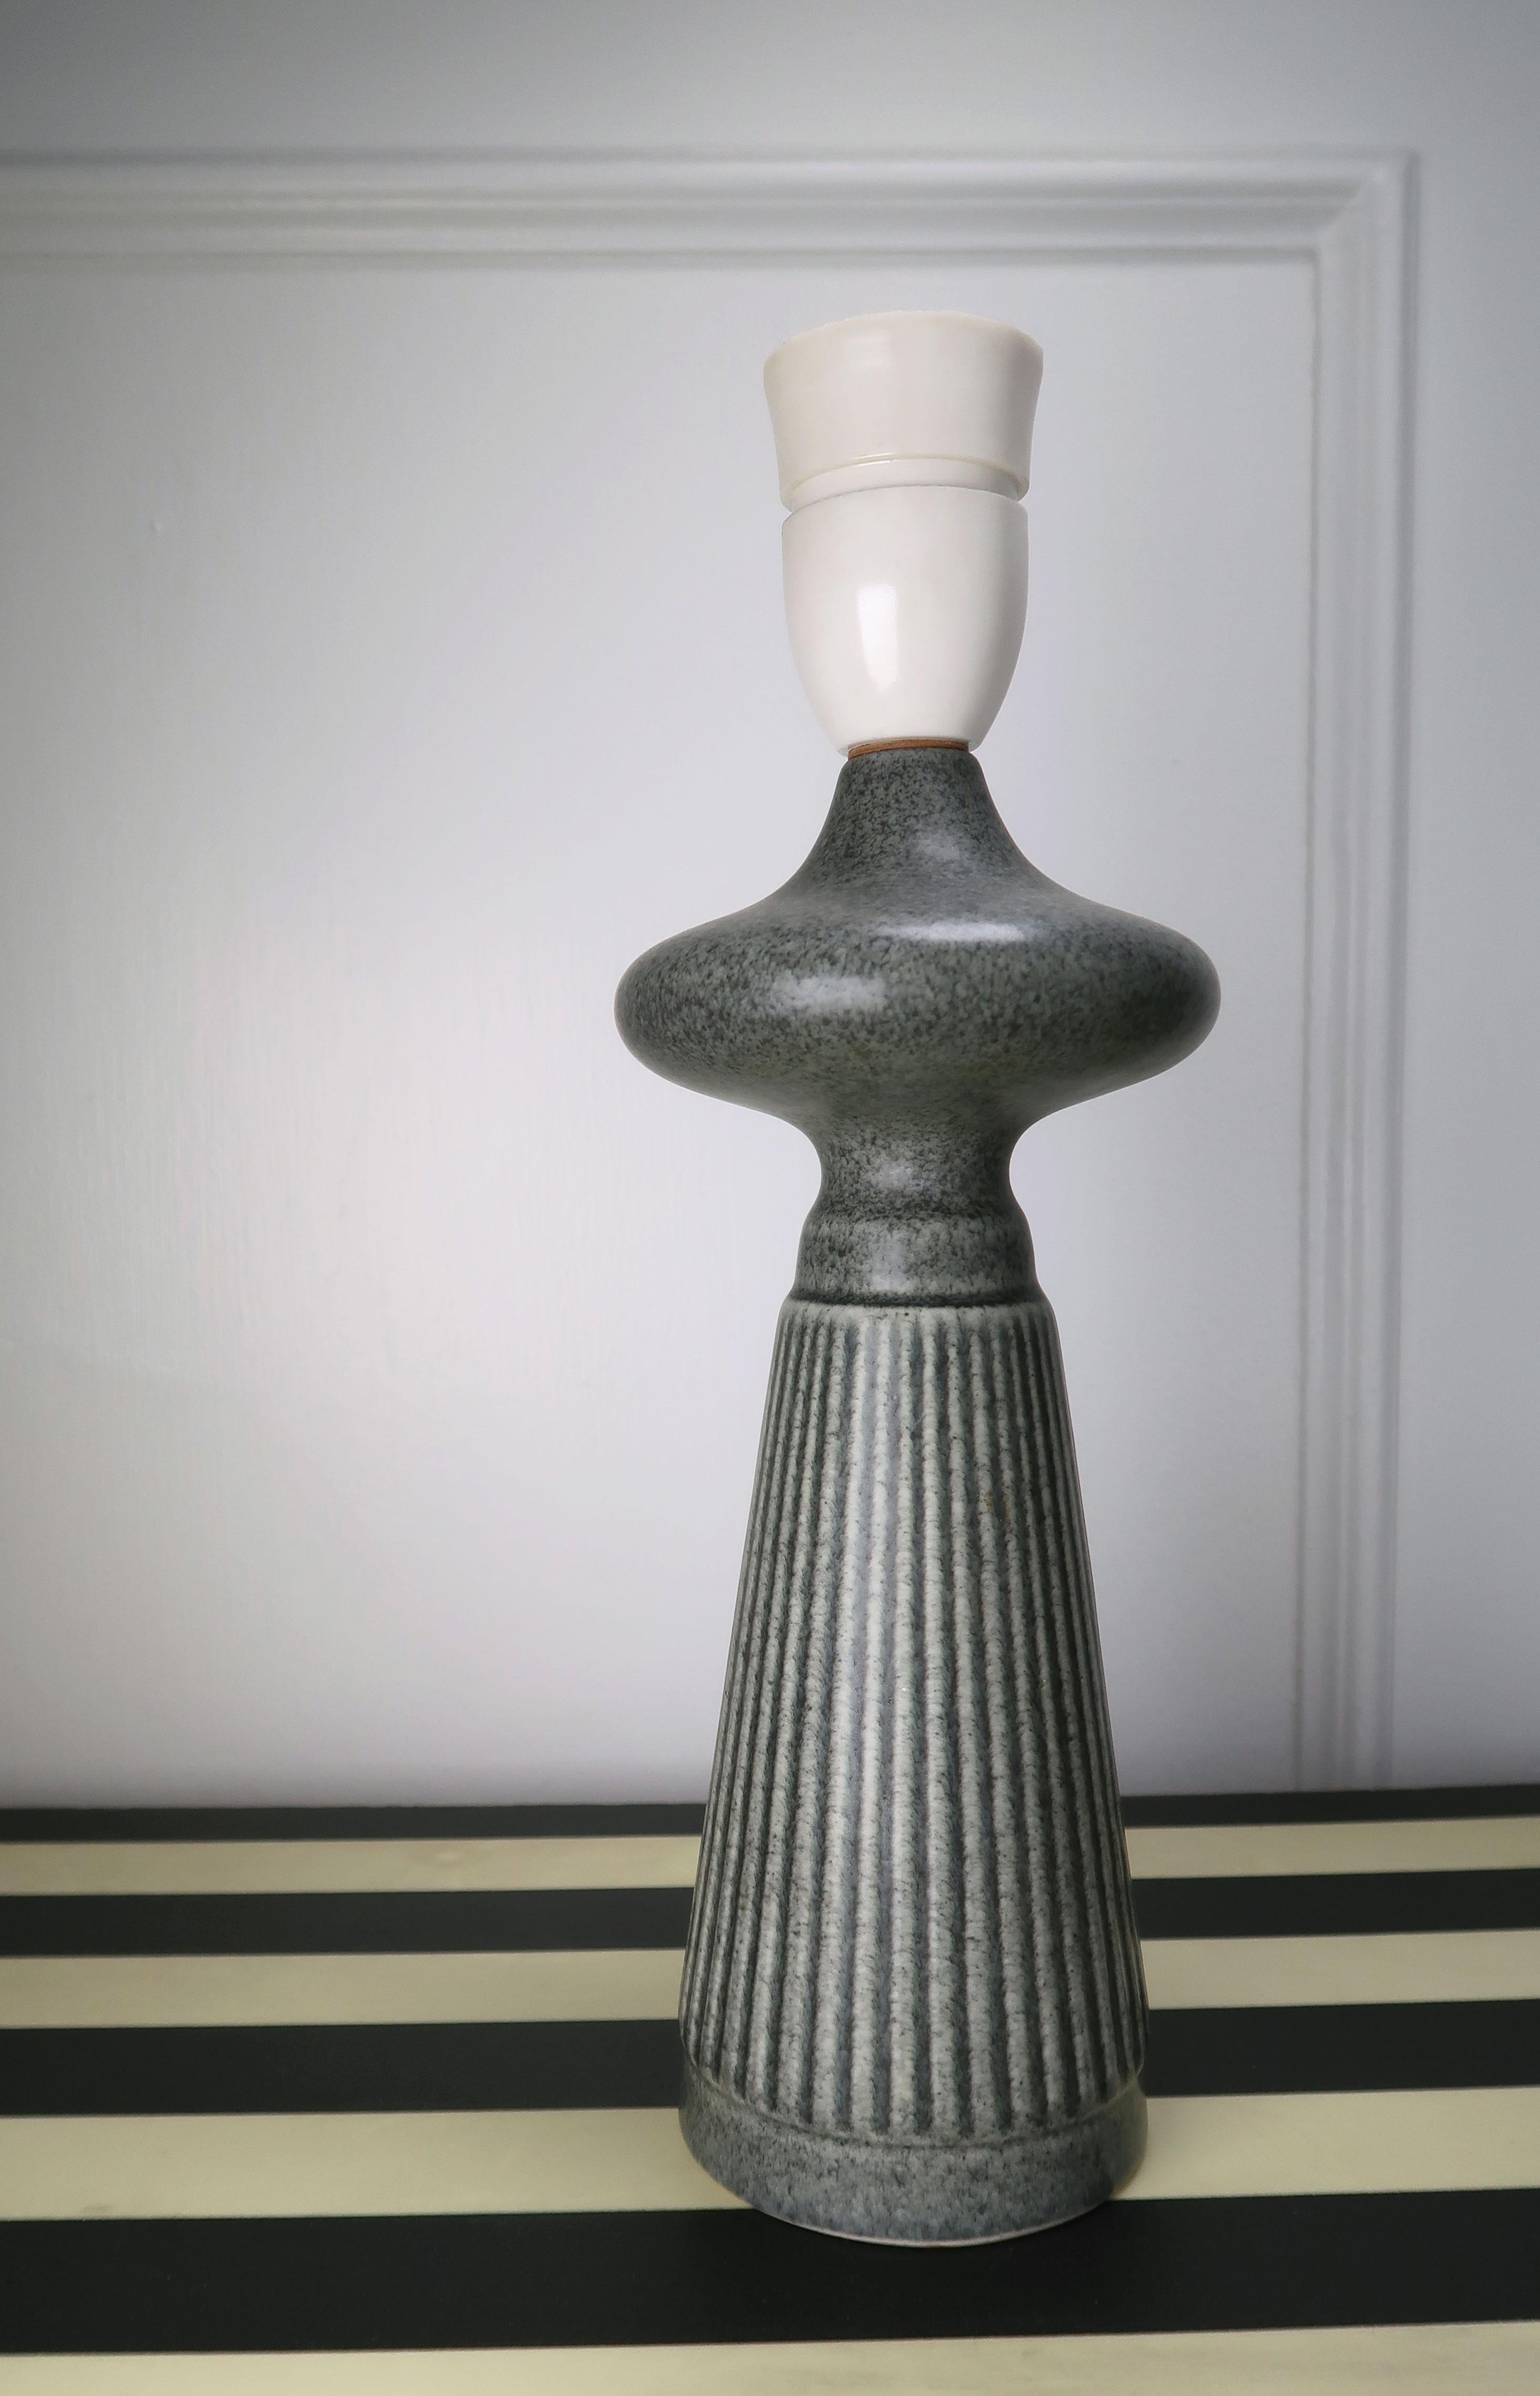 Sculptural lady shaped pewter green glazed smooth stoneware table lamp by Danish Søholm Stentøj. Attributed to Einar Johansen. Smooth top and vertical relief striped pattern on body. Model 958. Stamped under base. In beautiful vintage